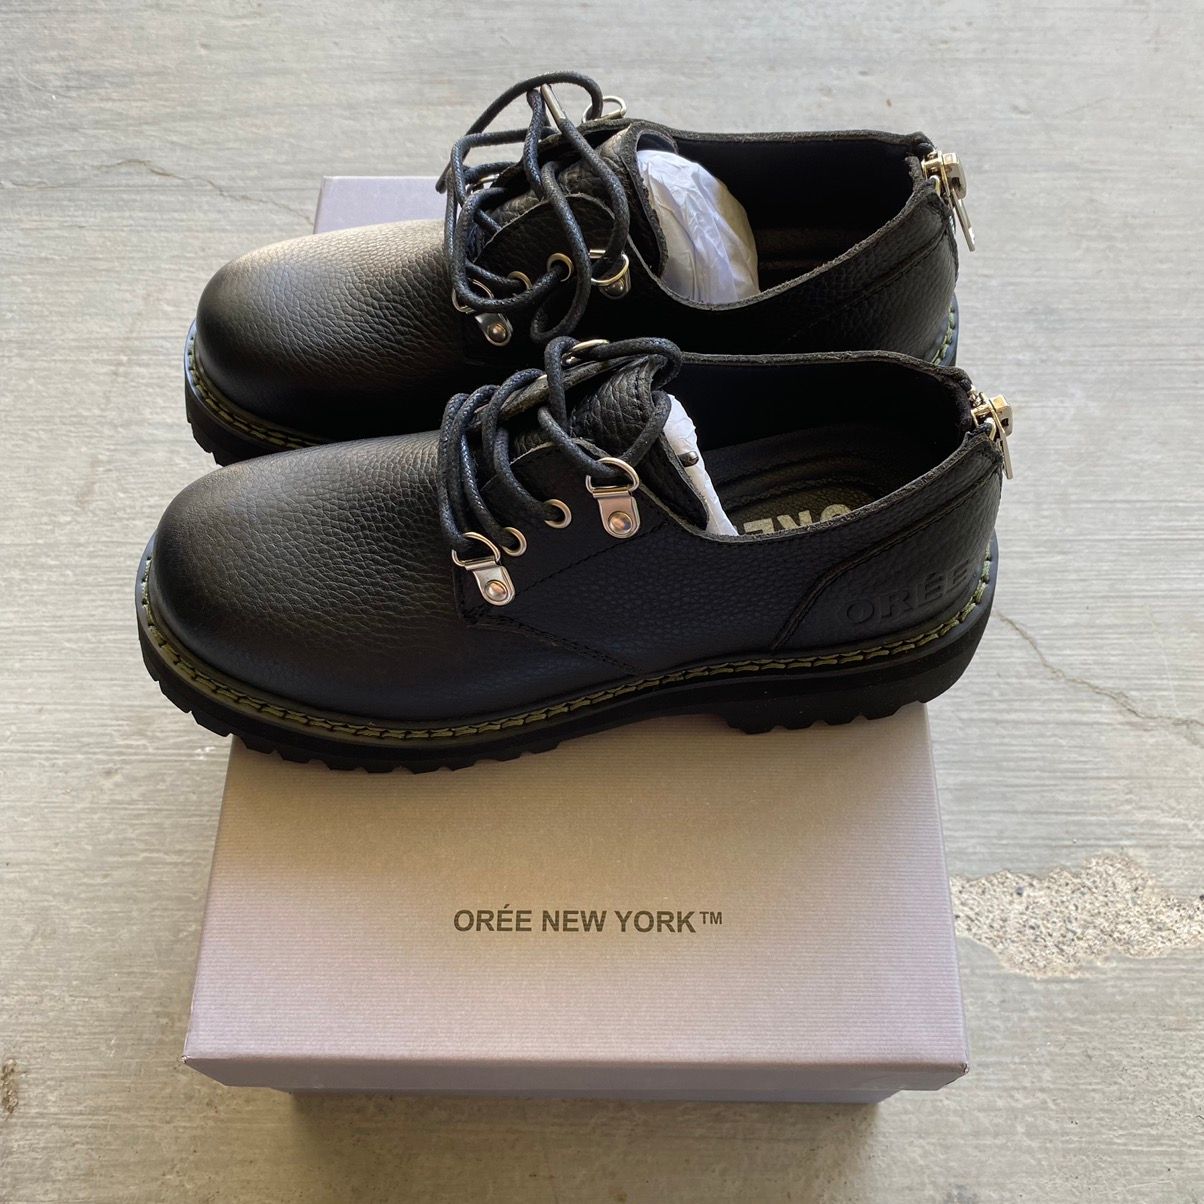 Oree New York Oree Infantry Lace Up Derby | Grailed